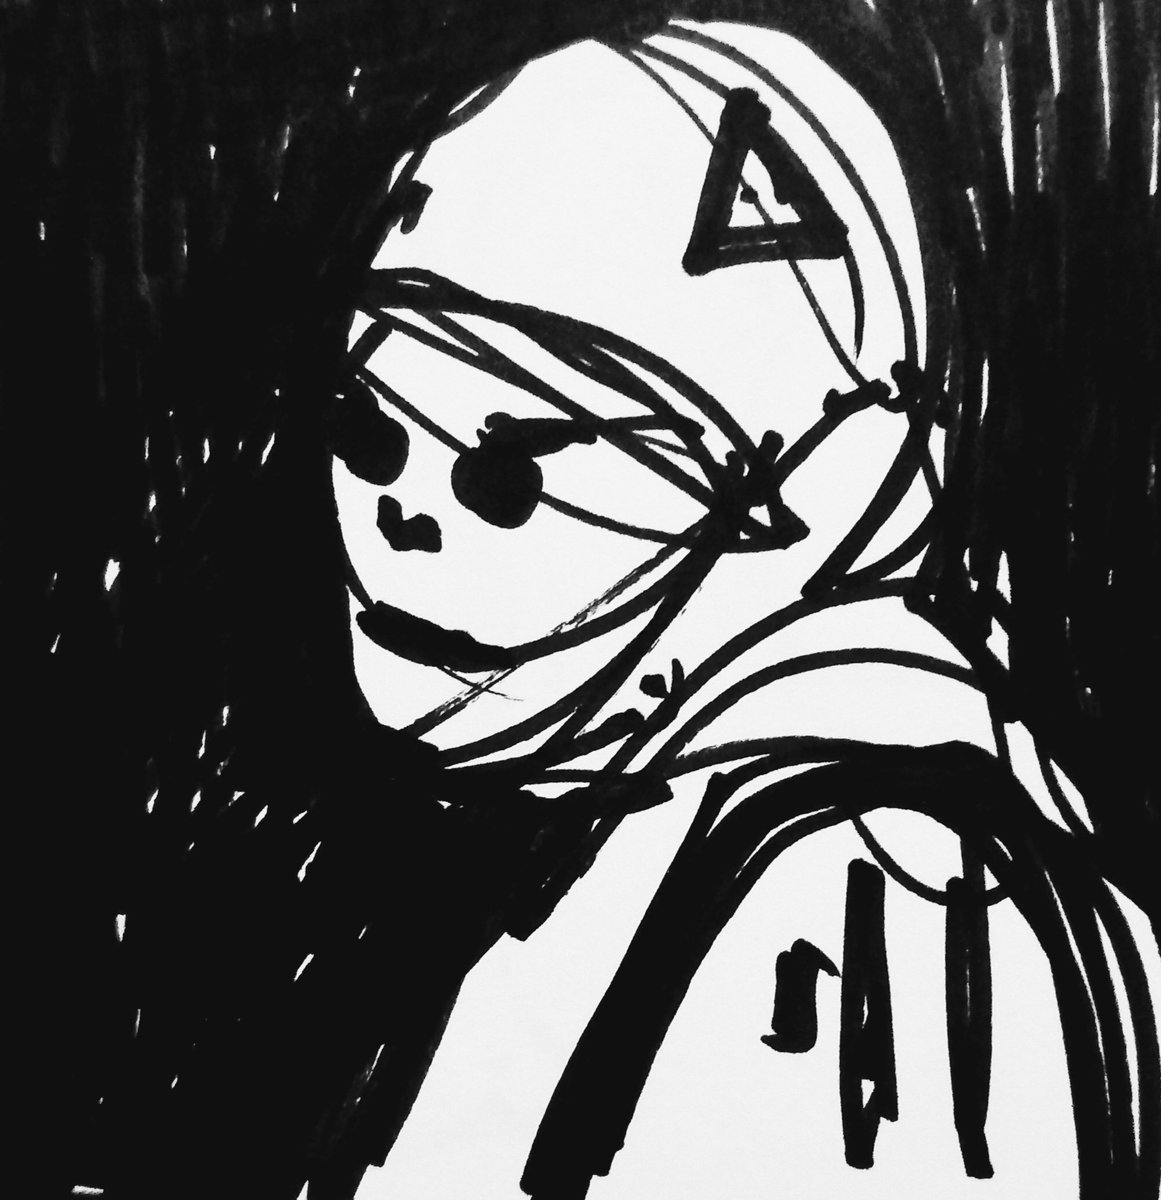 #draweveryday #everyday ' #motorcyclist ' pen on paper  #observational #face #expressivedrawing #expressive #art #symbol